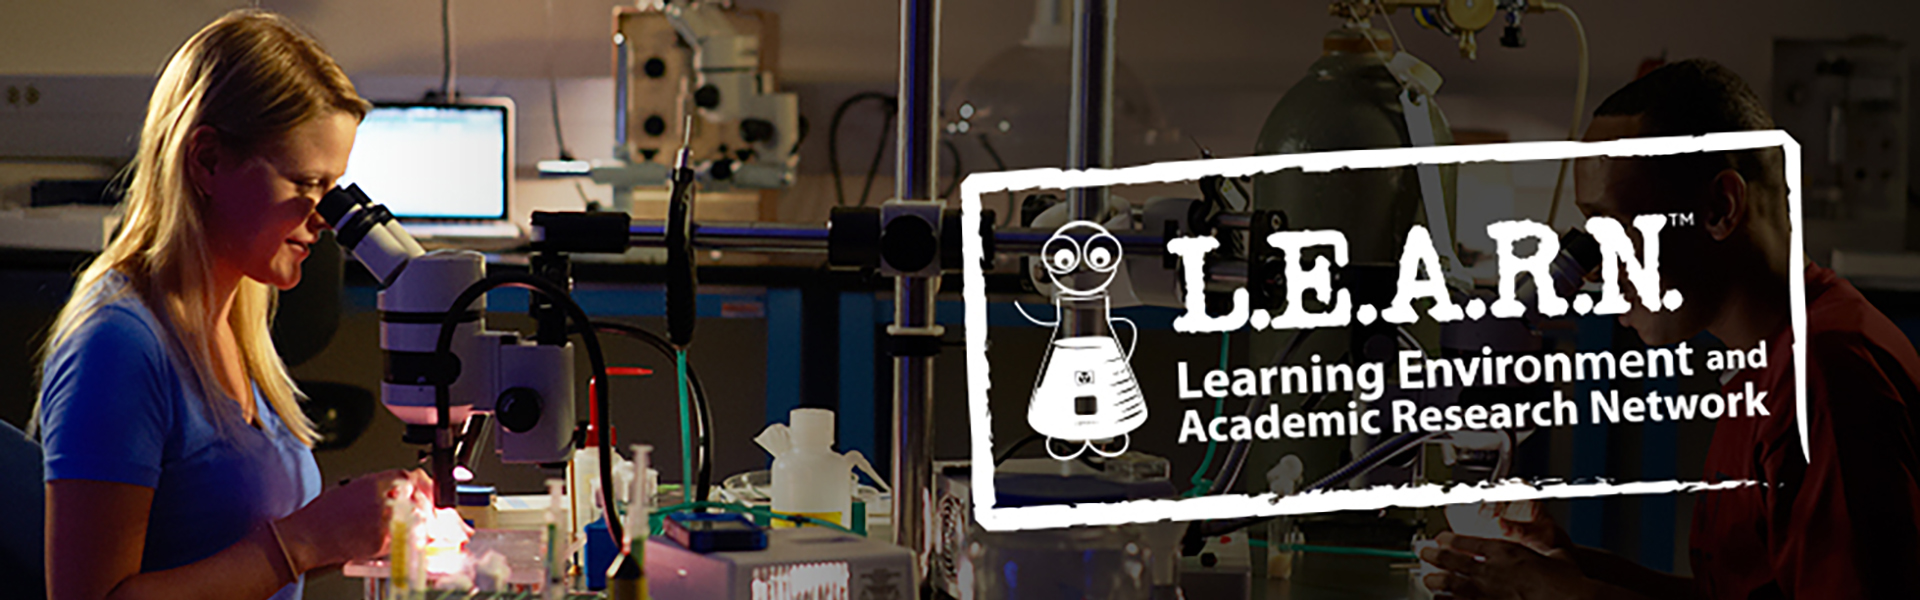 L.E.A.R.N. banner - students in a lab